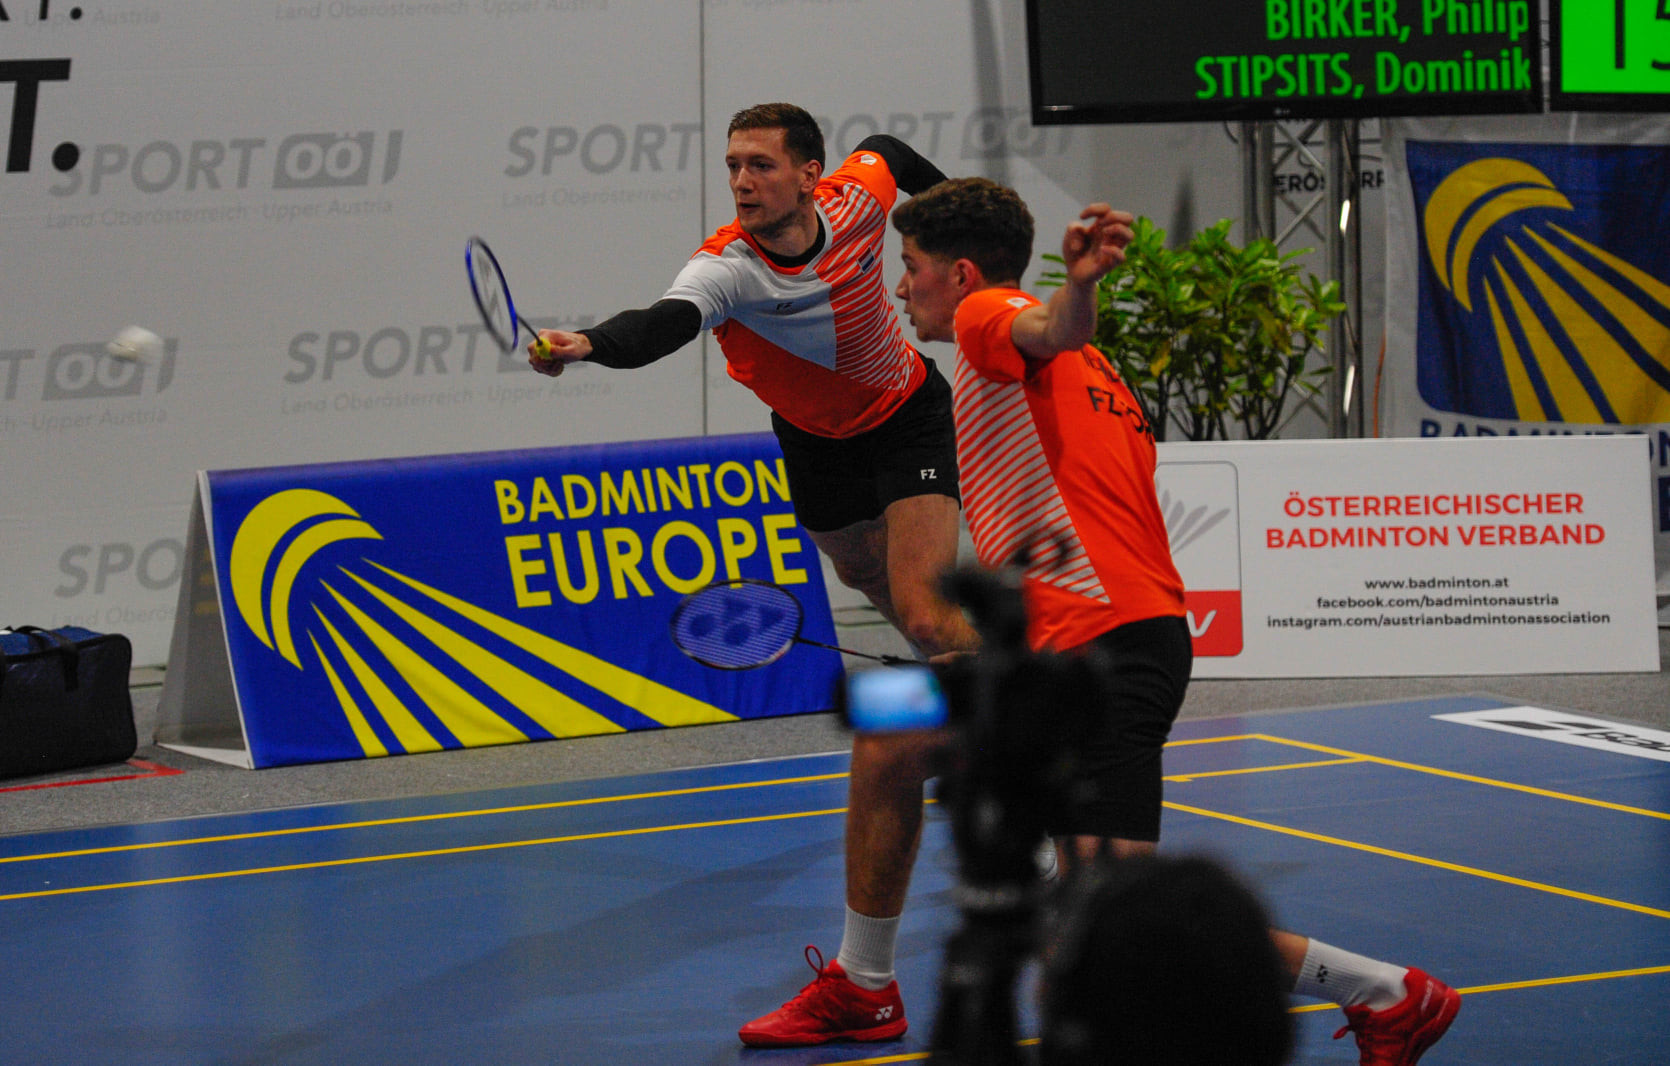 The Netherlands made it two wins from two in Group 3 ©Facebook/Badminton Europe